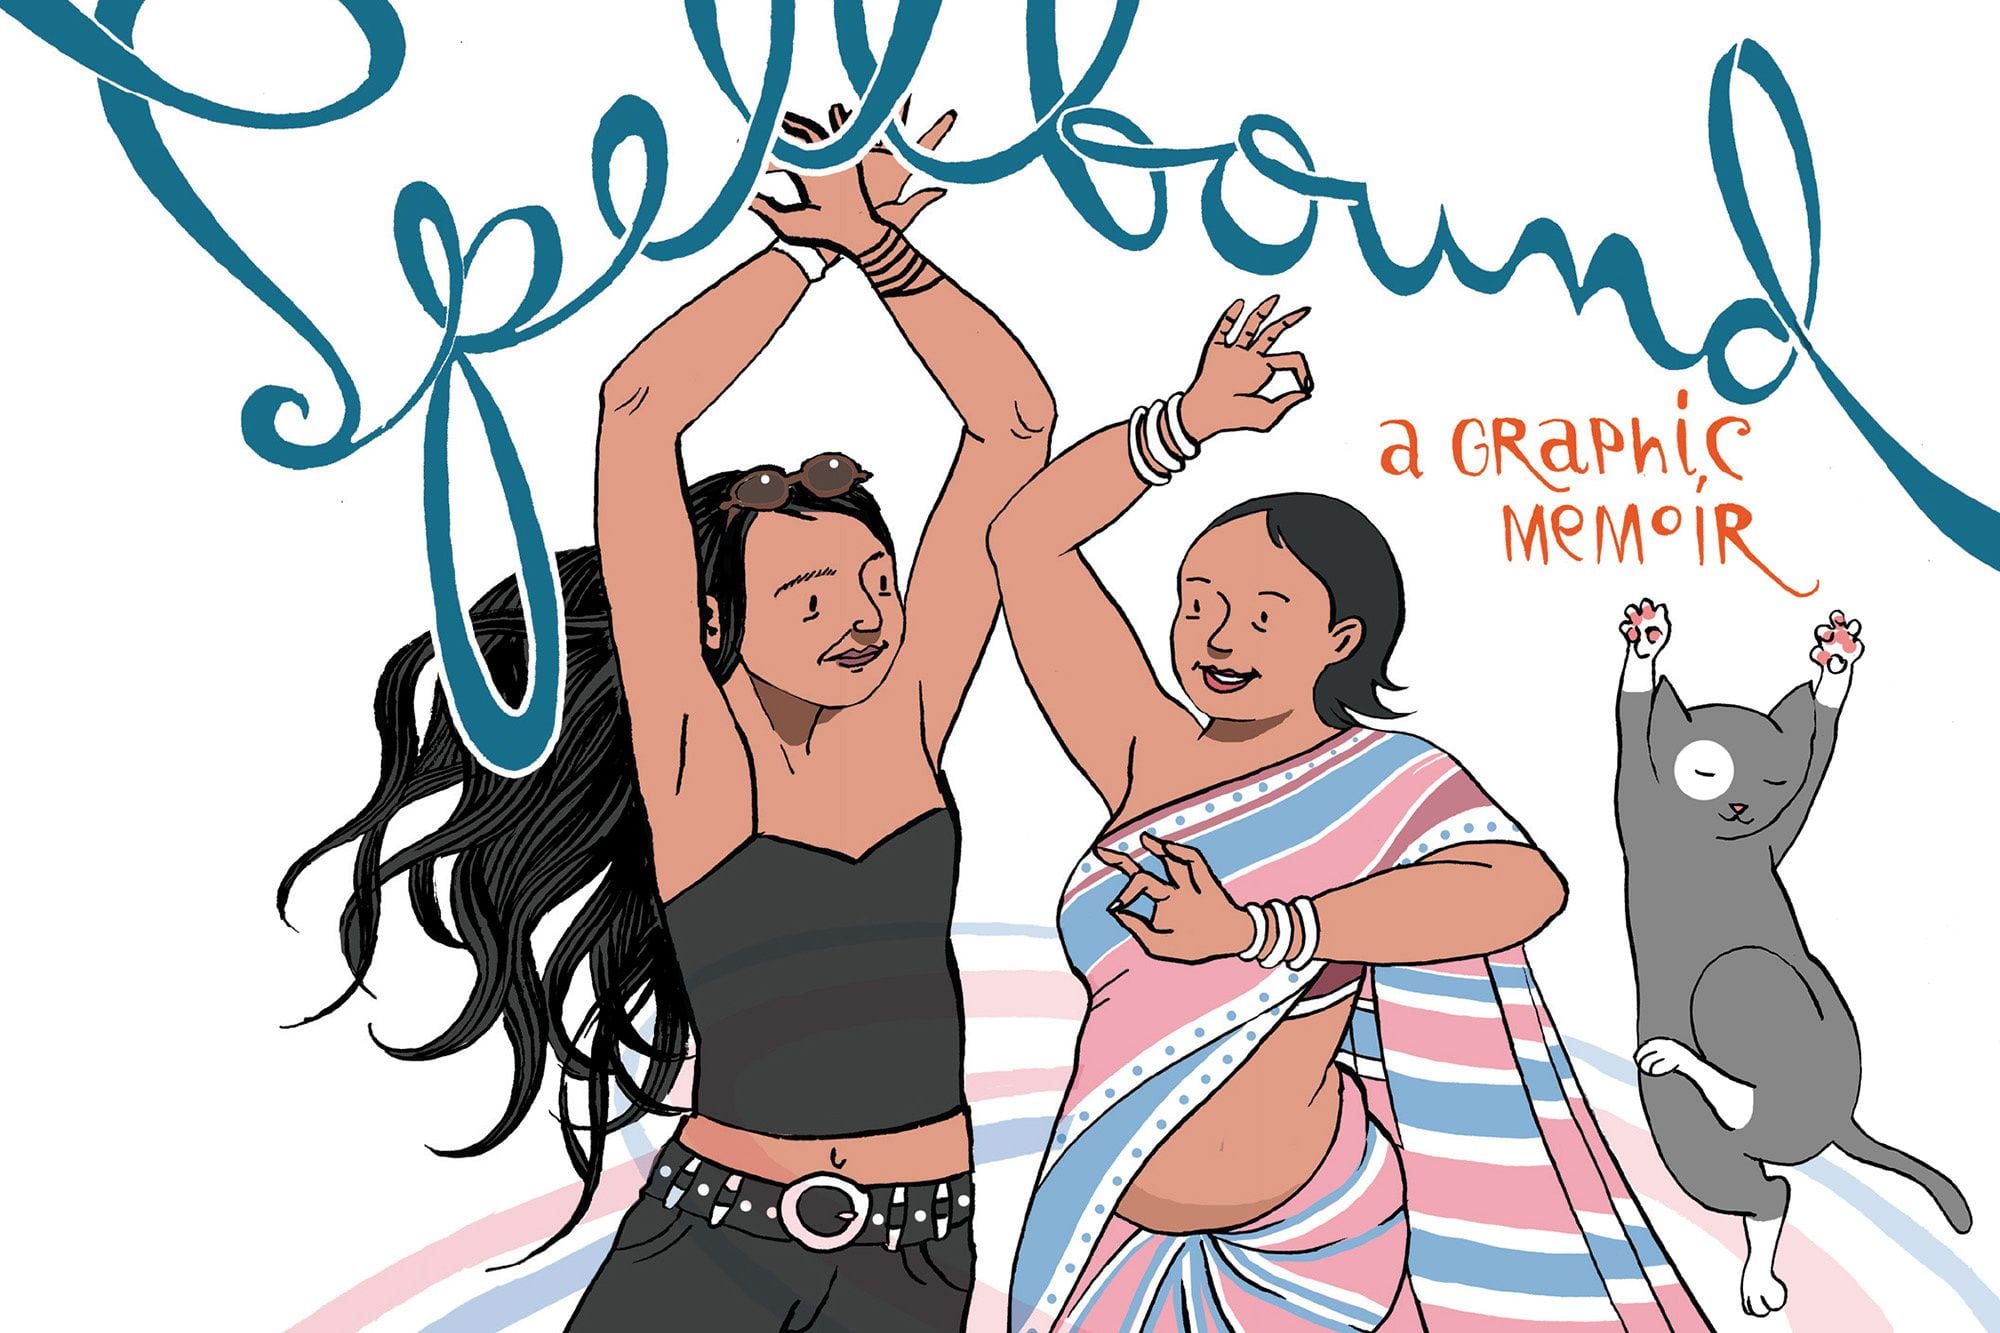 Bishakh Som’s ‘Spellbound’ Is an Innovative Take on the Graphic Memoir